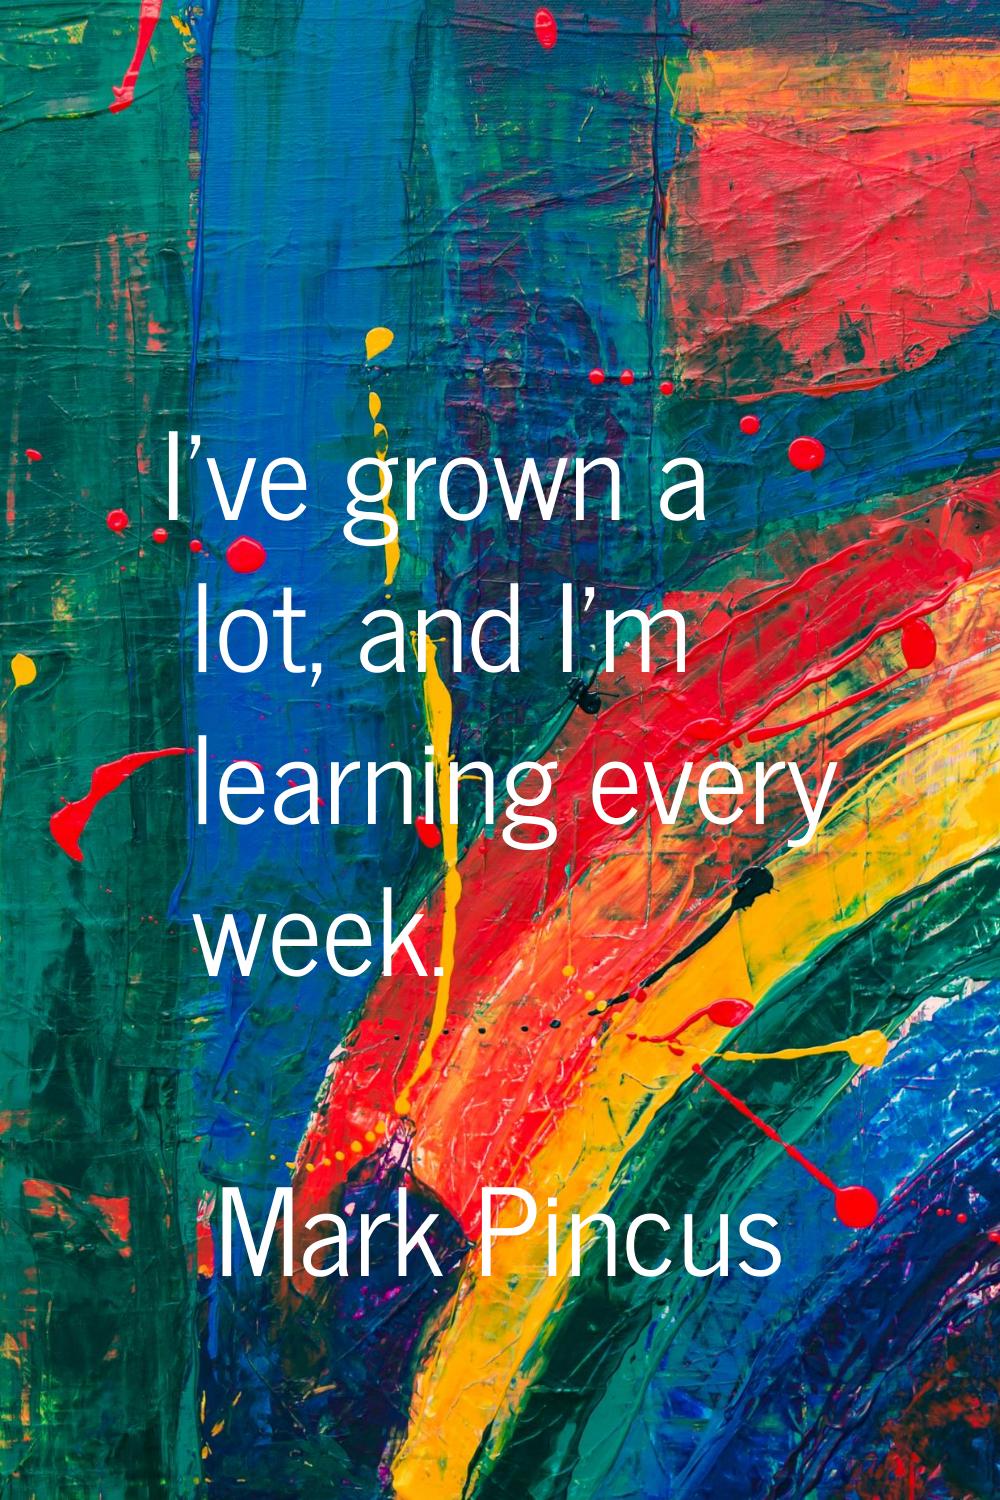 I've grown a lot, and I'm learning every week.